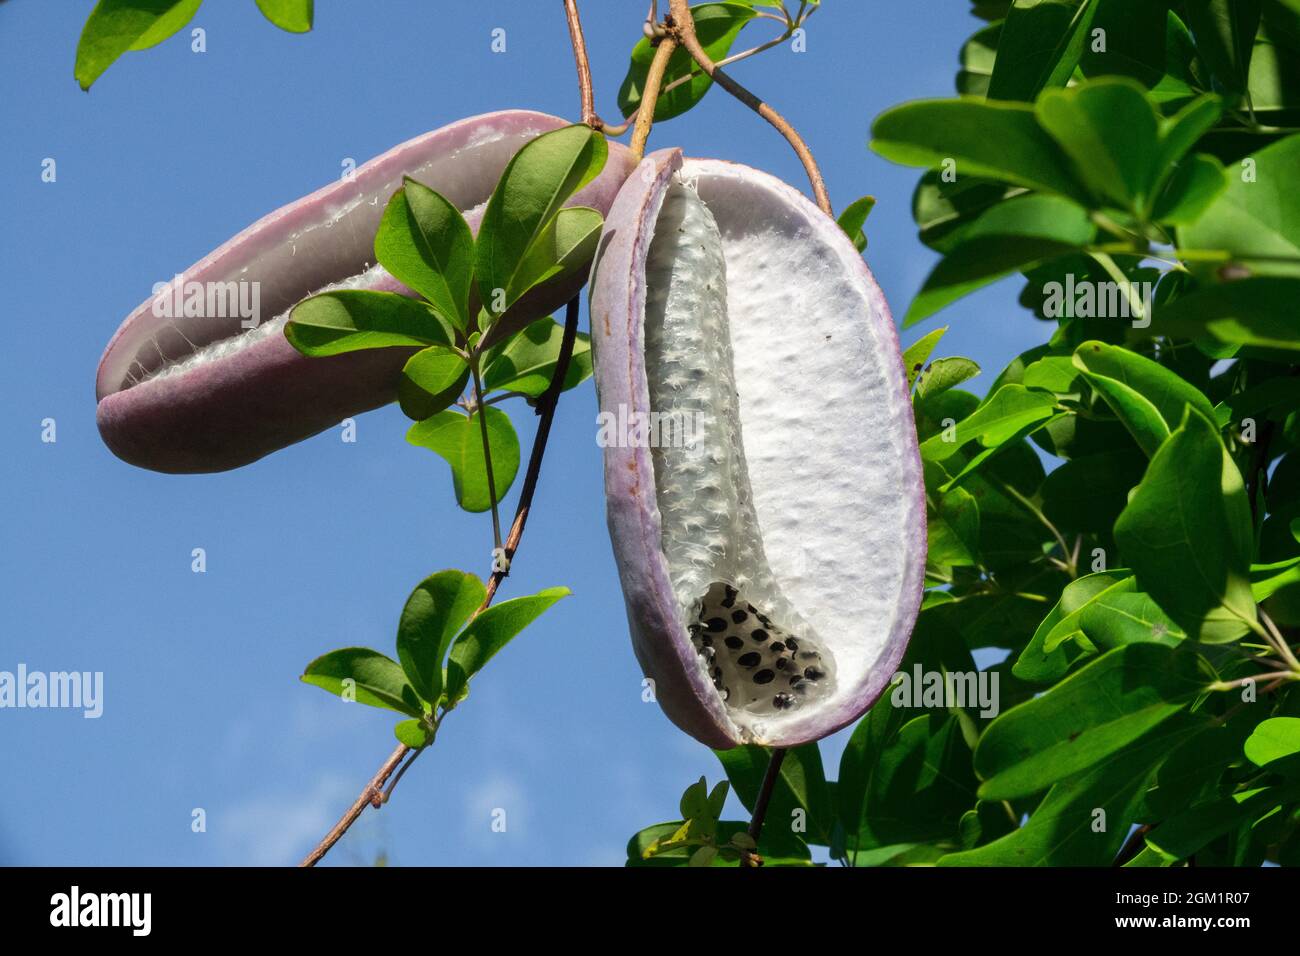 Akebia quinata seeds fruits in pods Chocolate vine blue sky Stock Photo